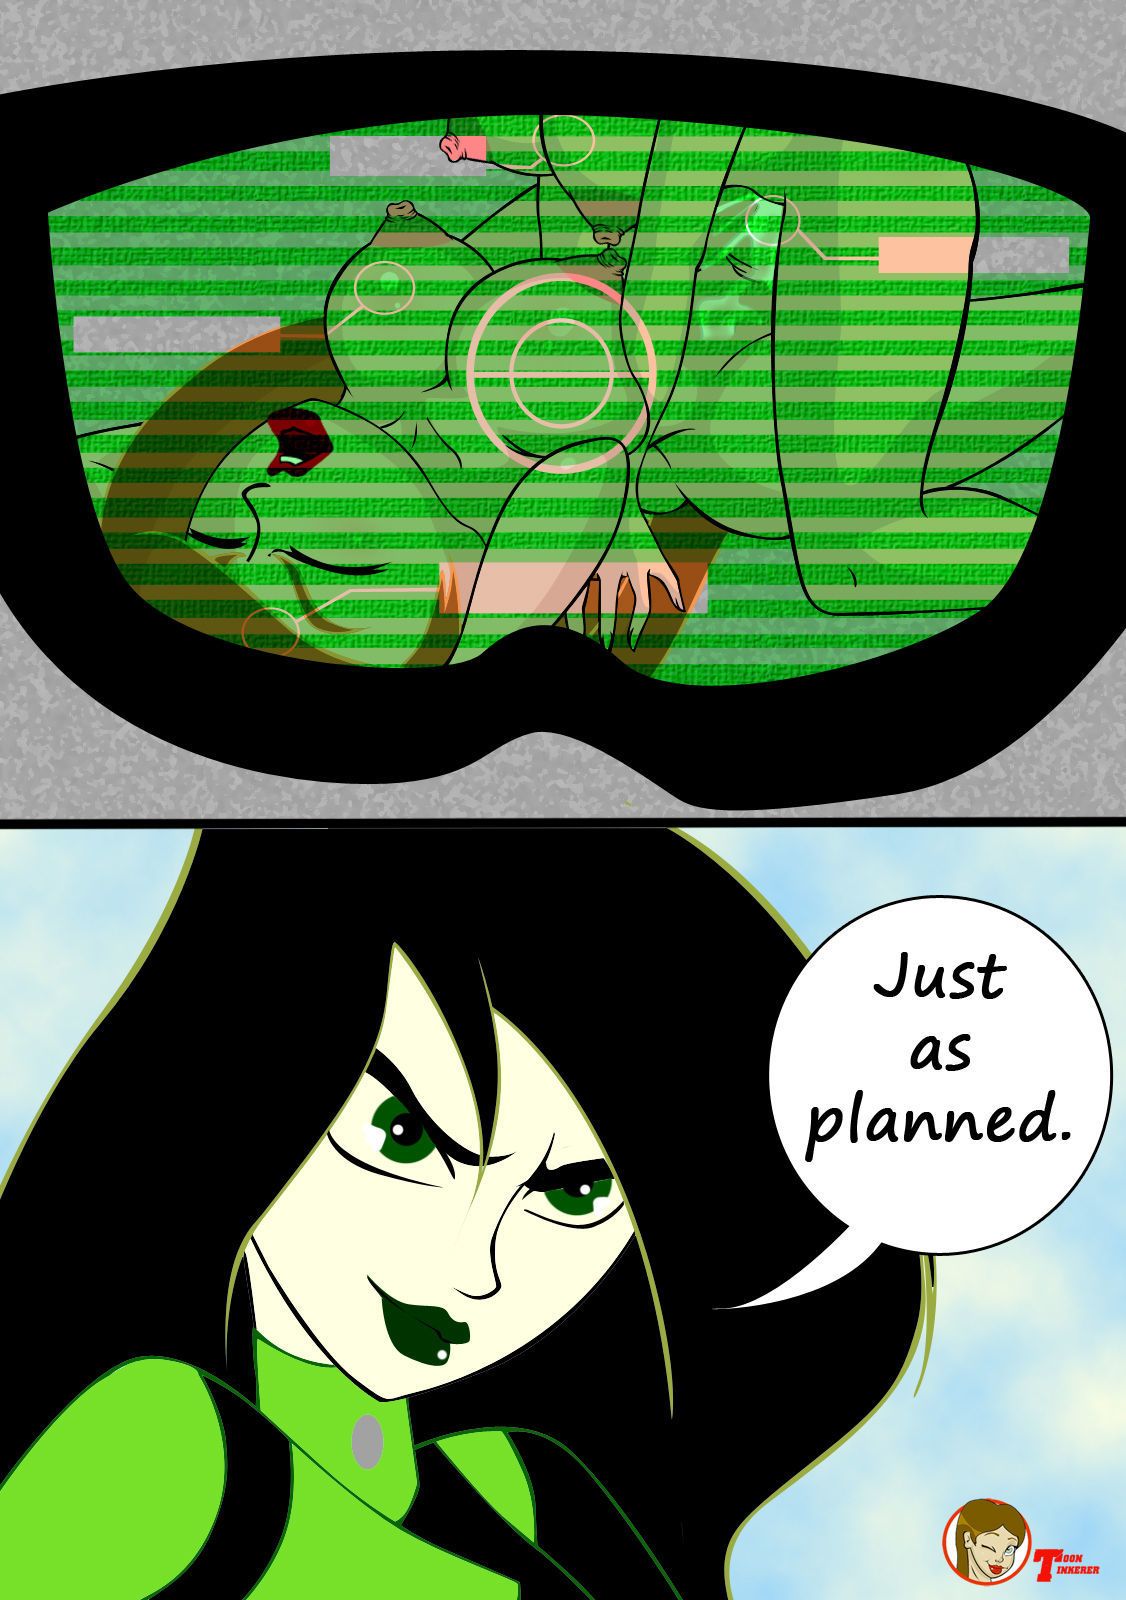 Toontinkerer Kim Plausible (Kim Possible)